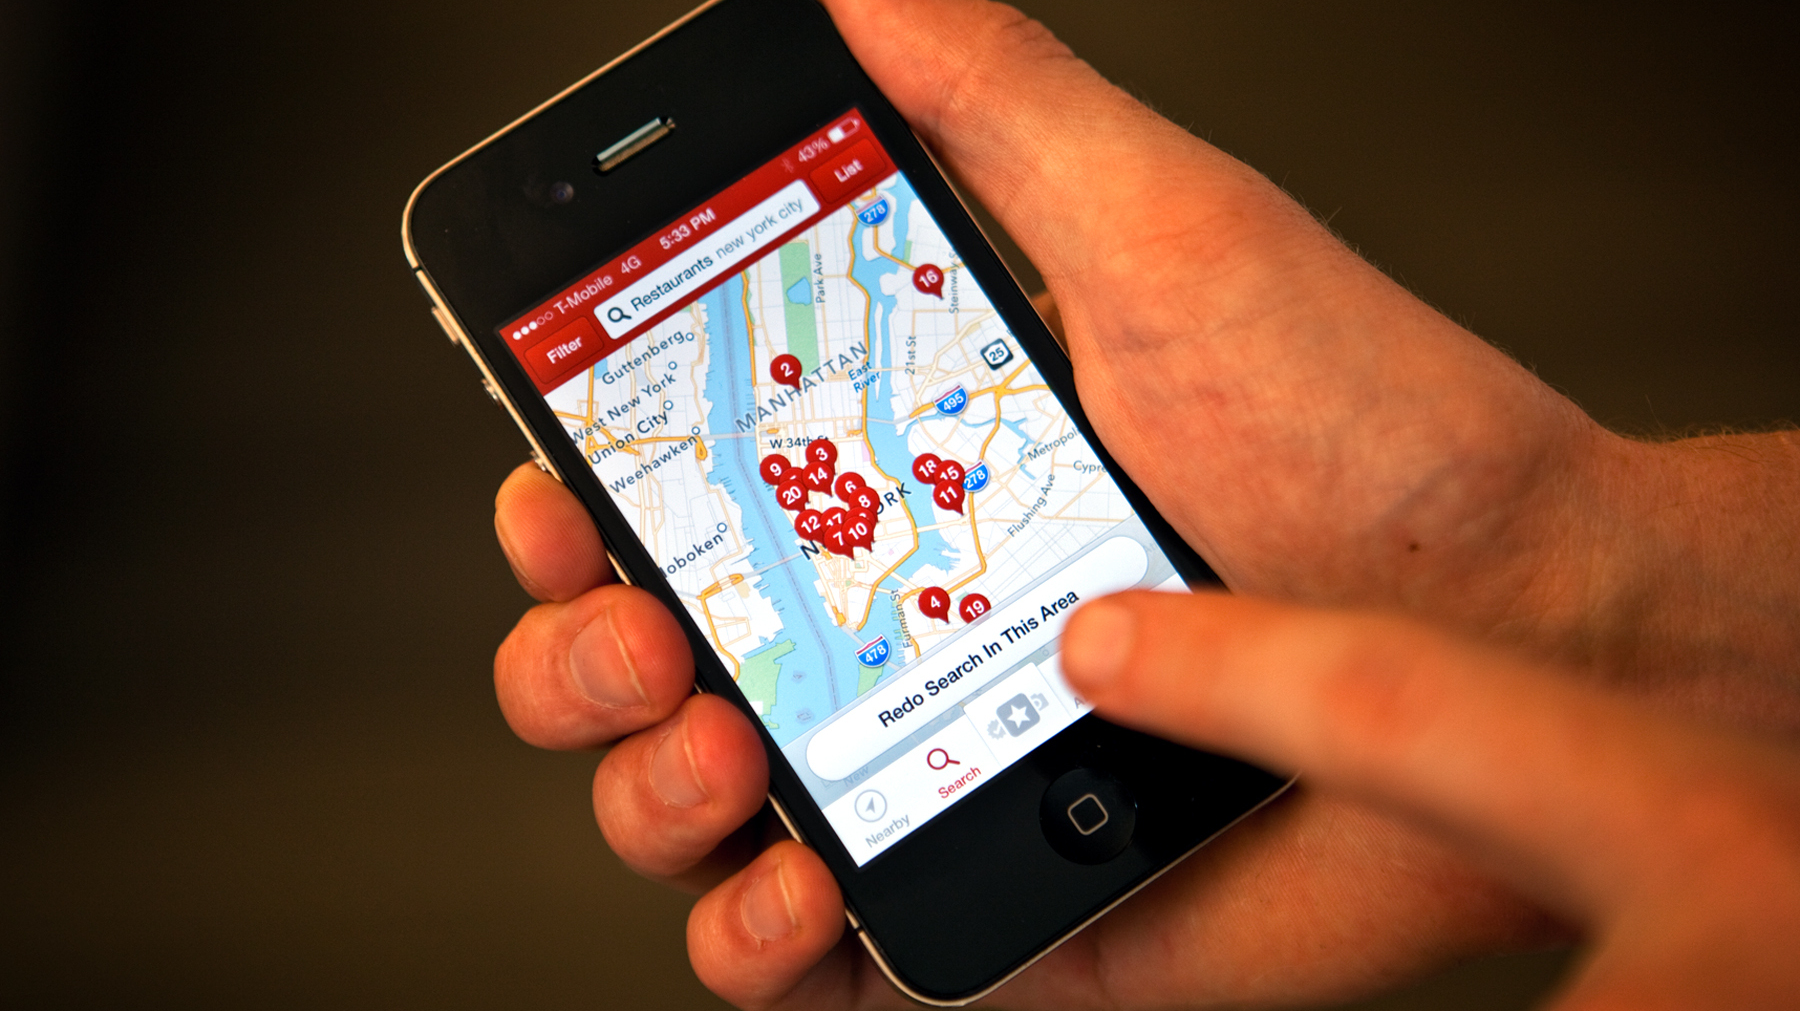 The Yelp app maps out restaurant locations in Manhattan. Photo: Meredith Rizzo/NPR